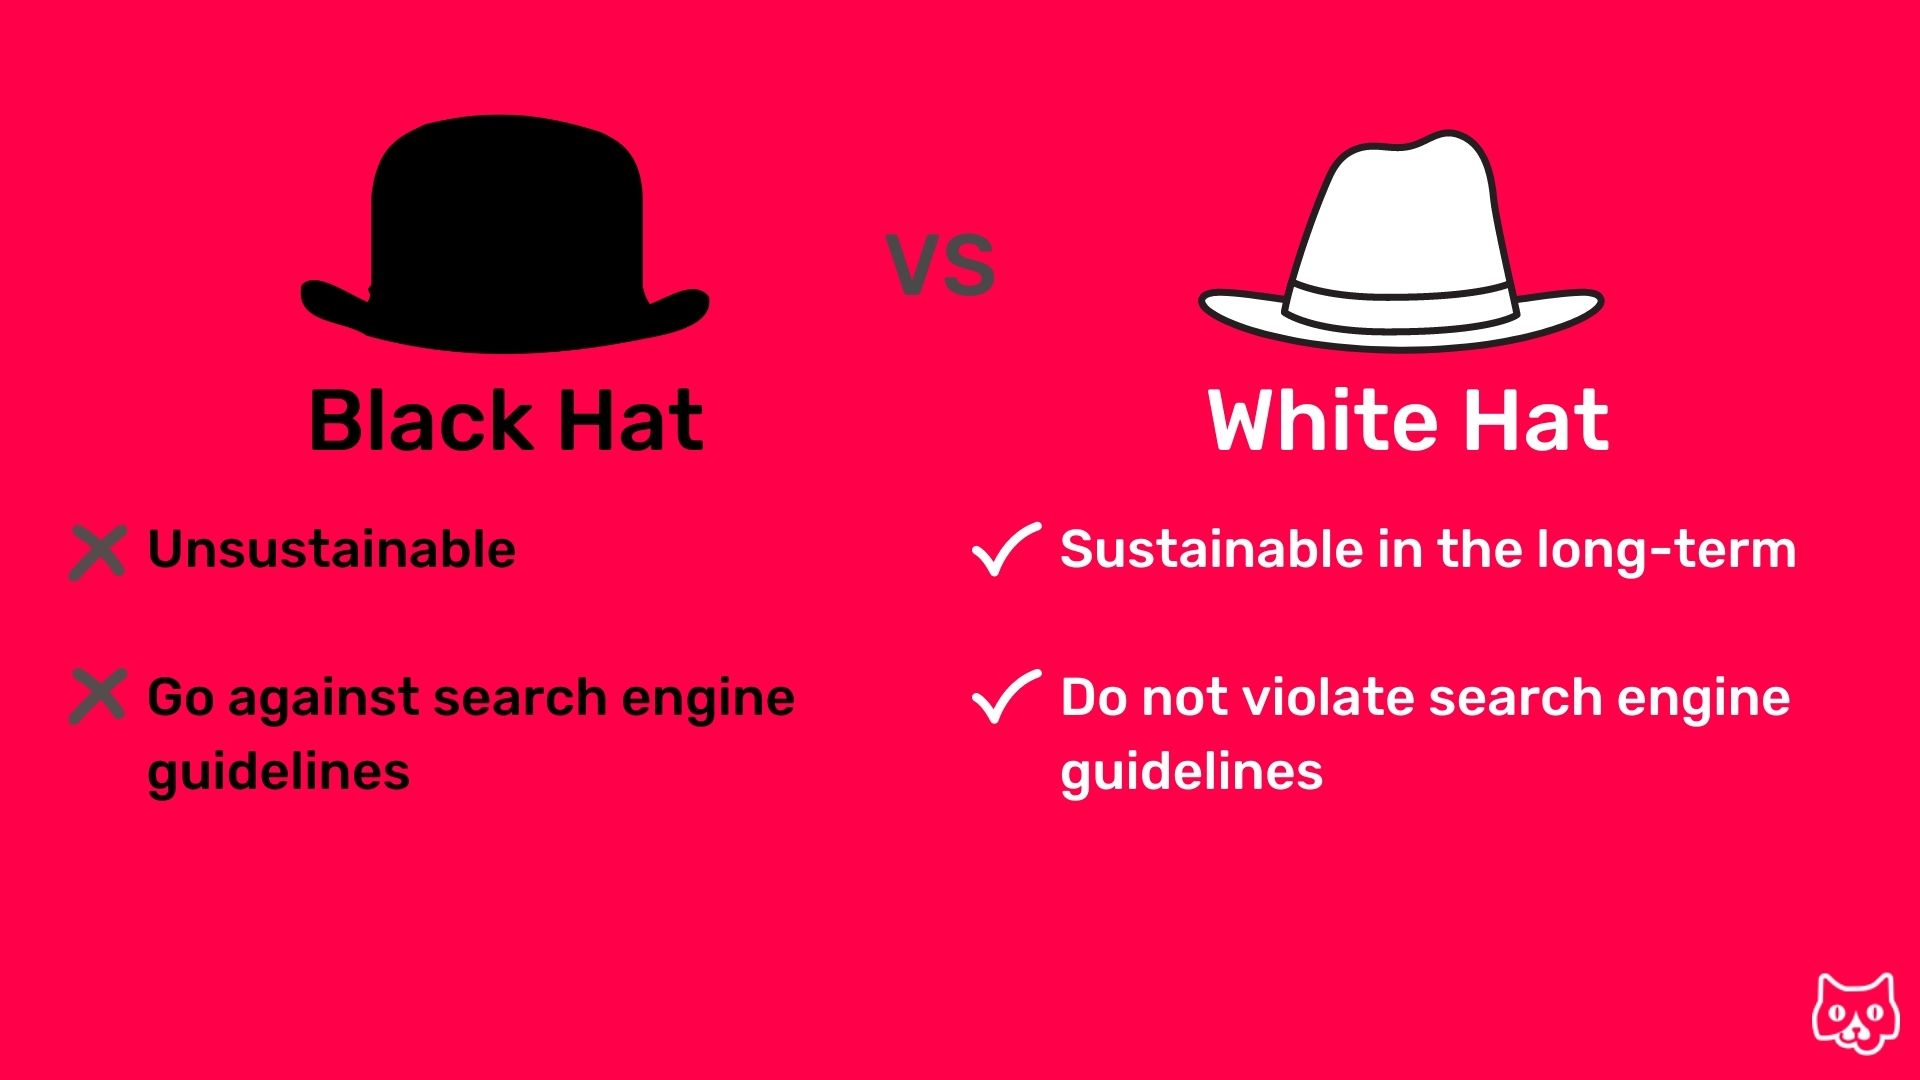 On the flying cat marketing red background, there is a clipart image of a black hat on the left and a white hat on the right.  Underneath the black hat are two bulletpoints which read "unsustainable" and "go against search engine guidelines".   Underneath the white hat are two bullet points which list the opposite; that white hat SEO is "sustainable in the long term" and "does not violate search engine guidelines" 